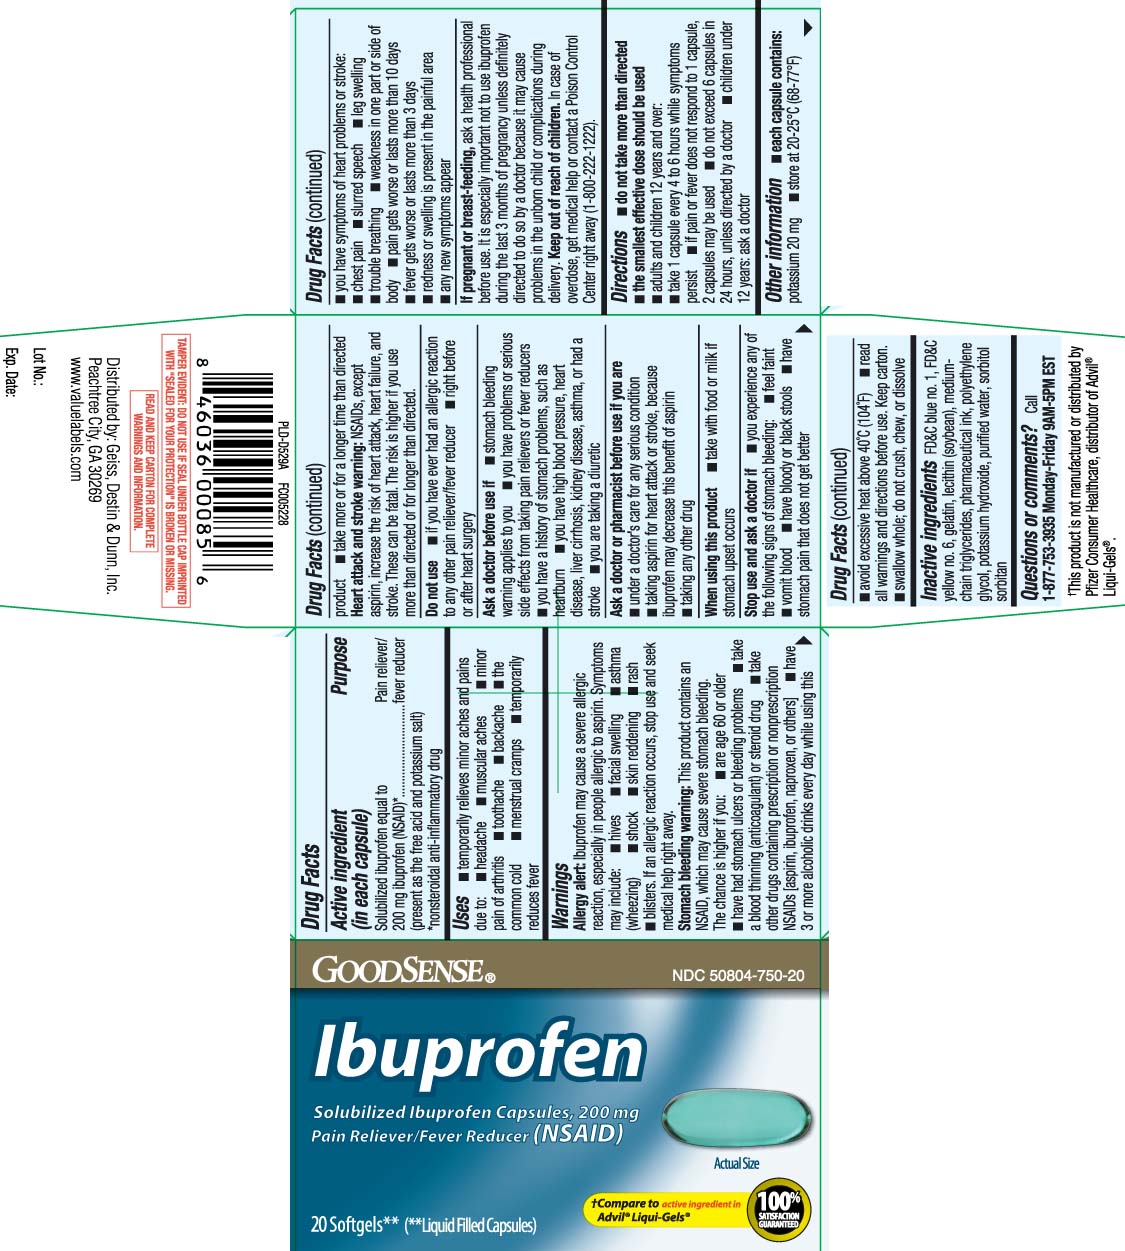 Solubilized ibuprofen equal to 200 mg ibuprofen (NSAID)* (present as the free acid and potassium salt) *nonsteroidal anti-inflammatory